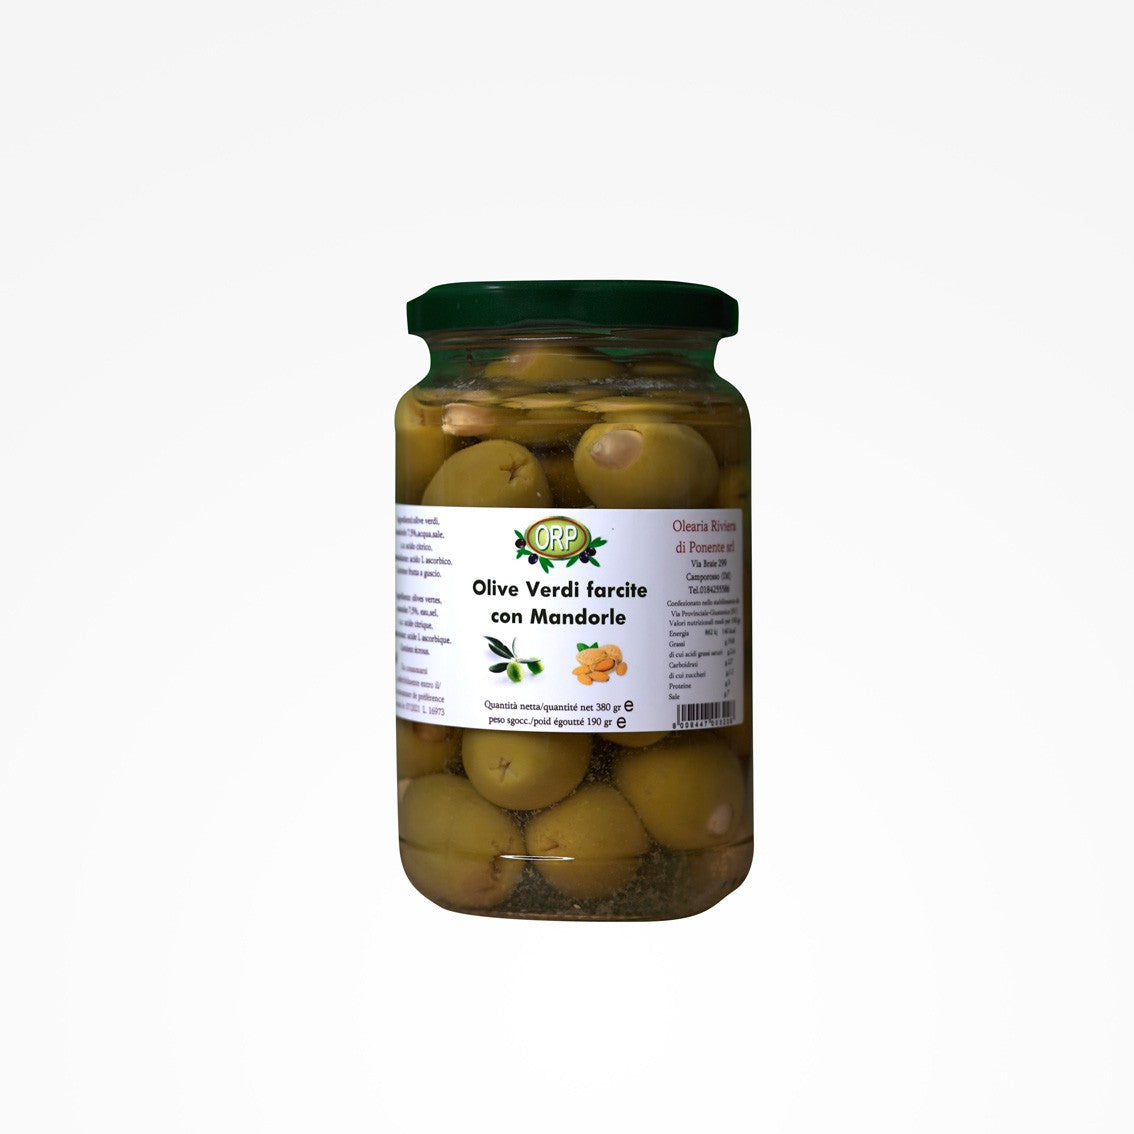 Green olives stuffed with almonds - Jar 380 gr.